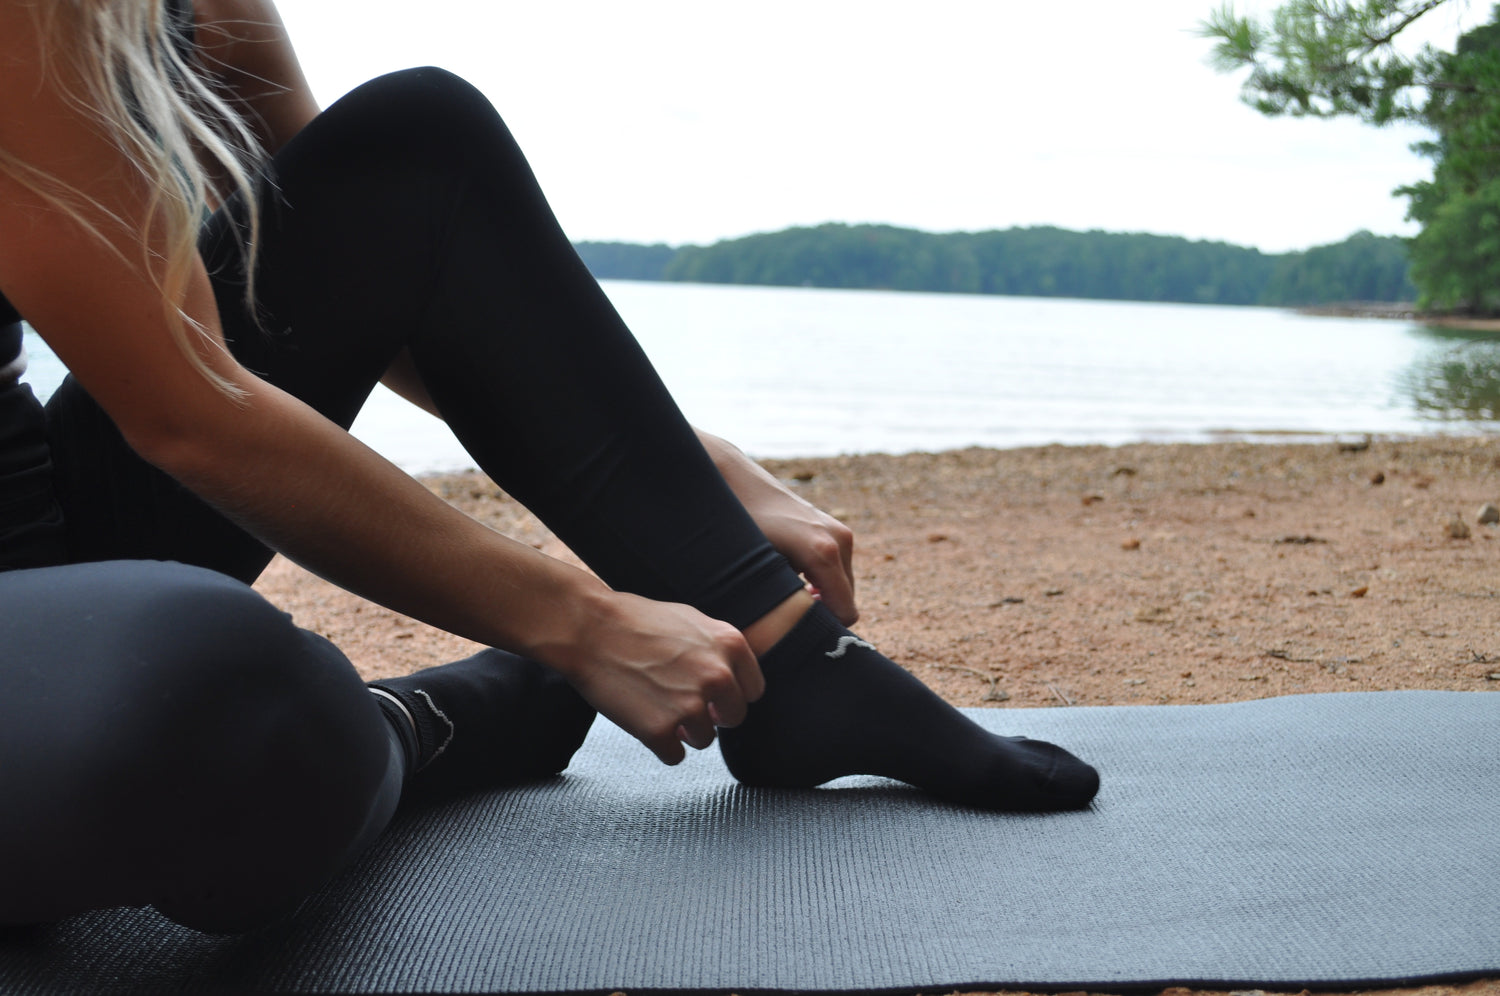 Image of a girl on a yoga mat wearing our odorless socks, practicing yoga in a serene lakeside setting